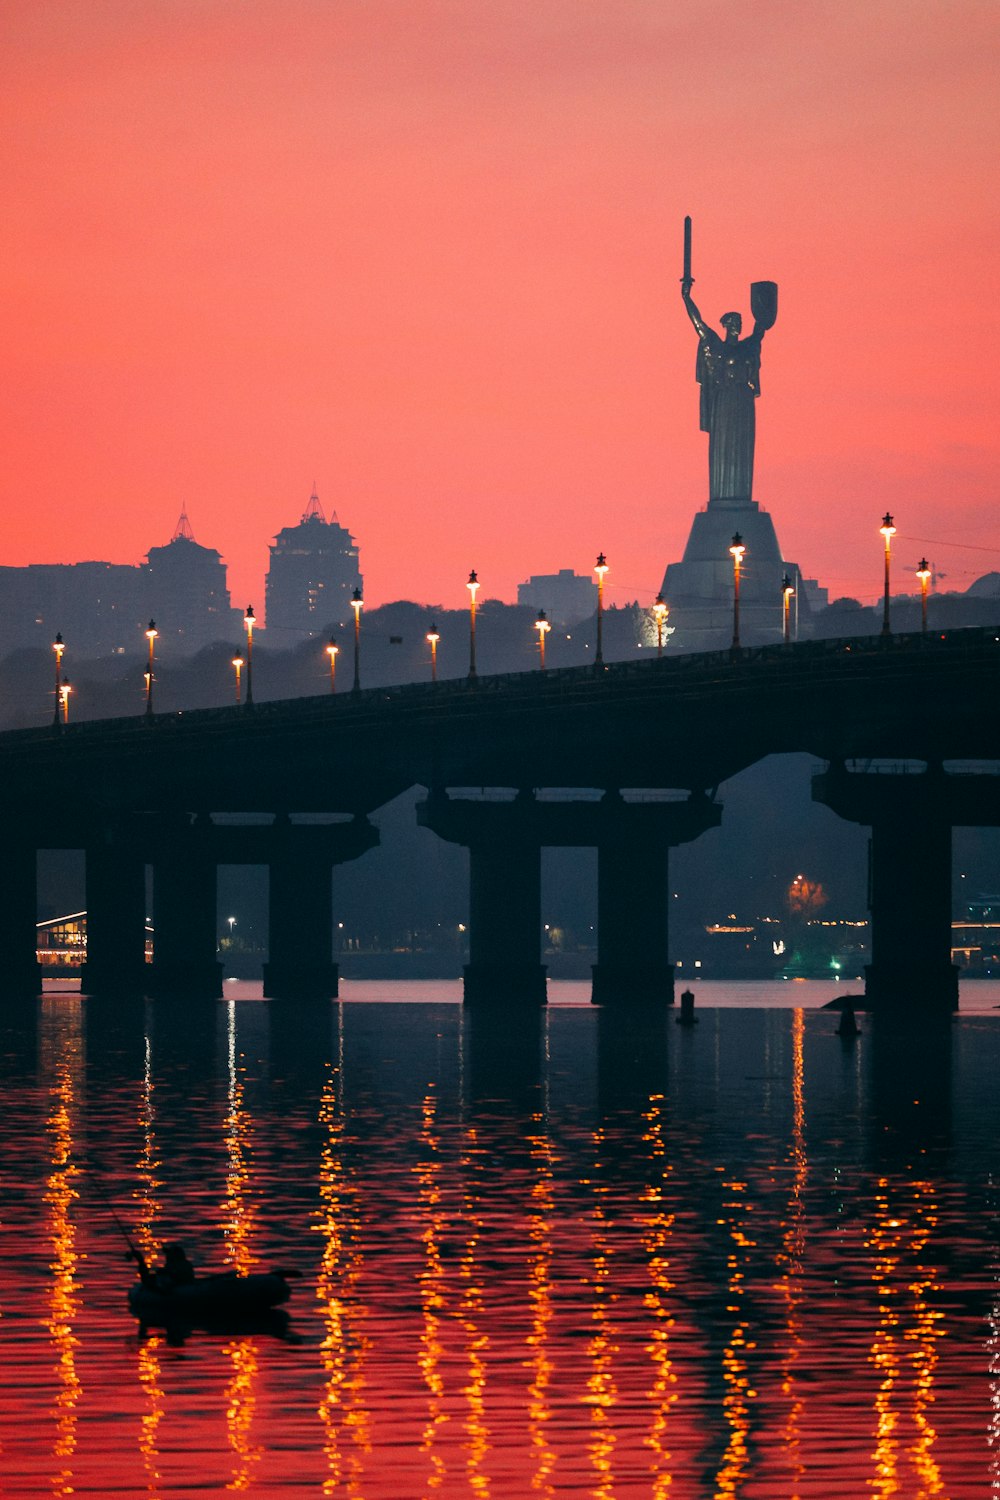 a bridge that has a statue on top of it